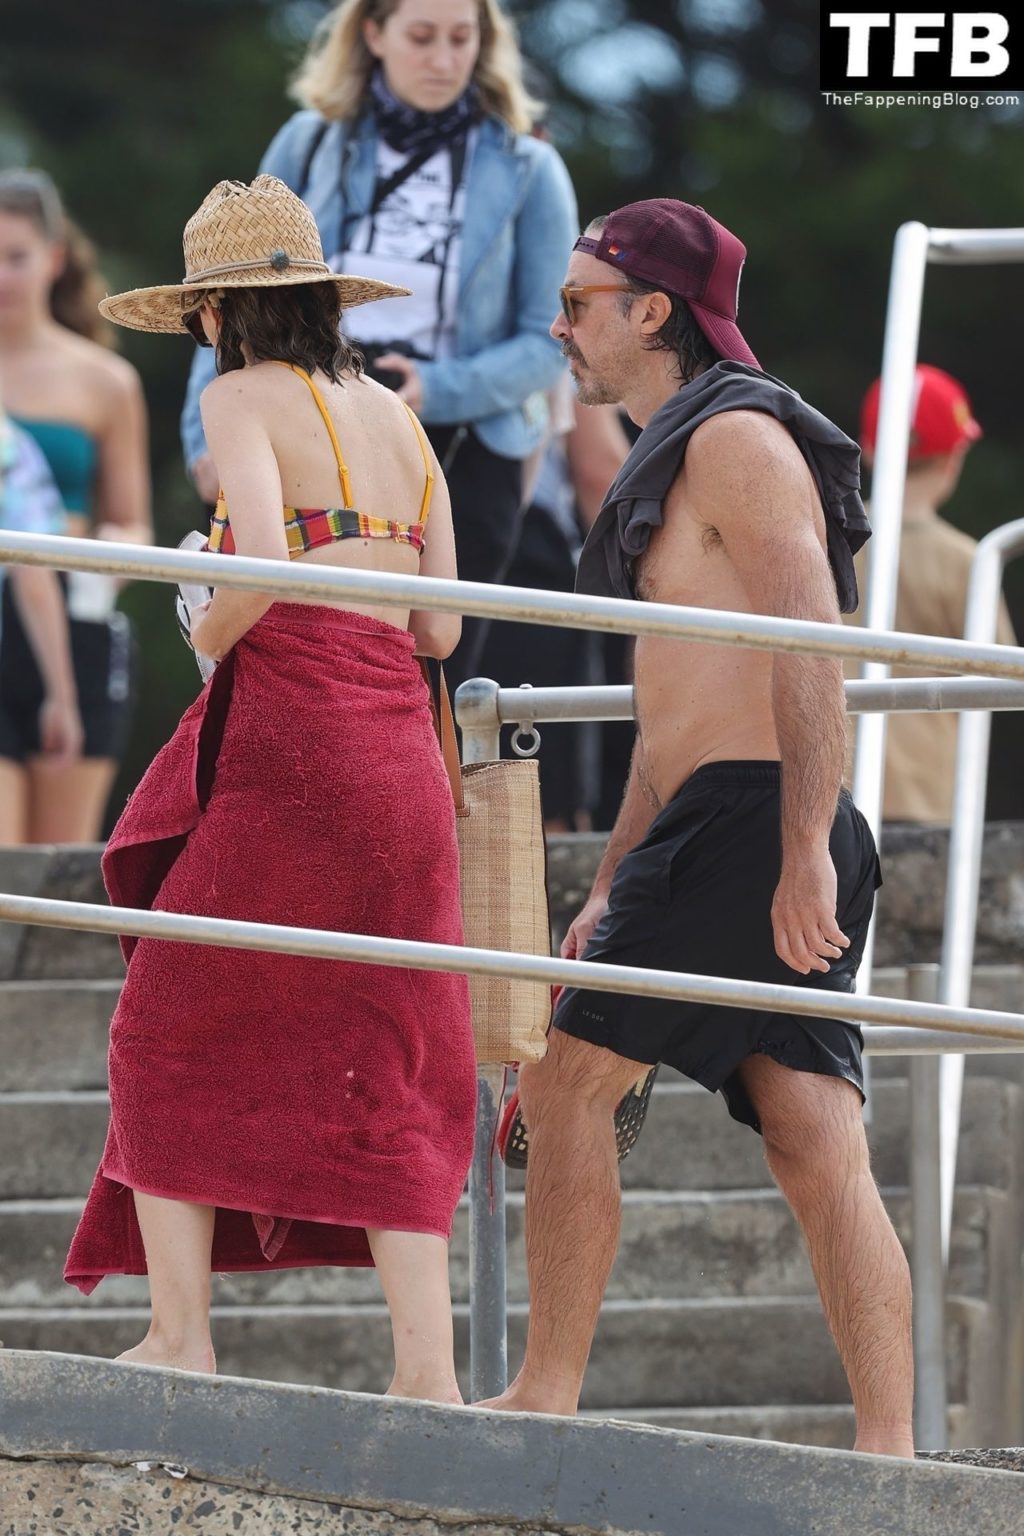 Rose Byrne Sexy The Fappening Blog 88 1024x1536 - Rose Byrne & Kick Gurry Enjoy a Day on the Beach in Sydney (90 Photos)